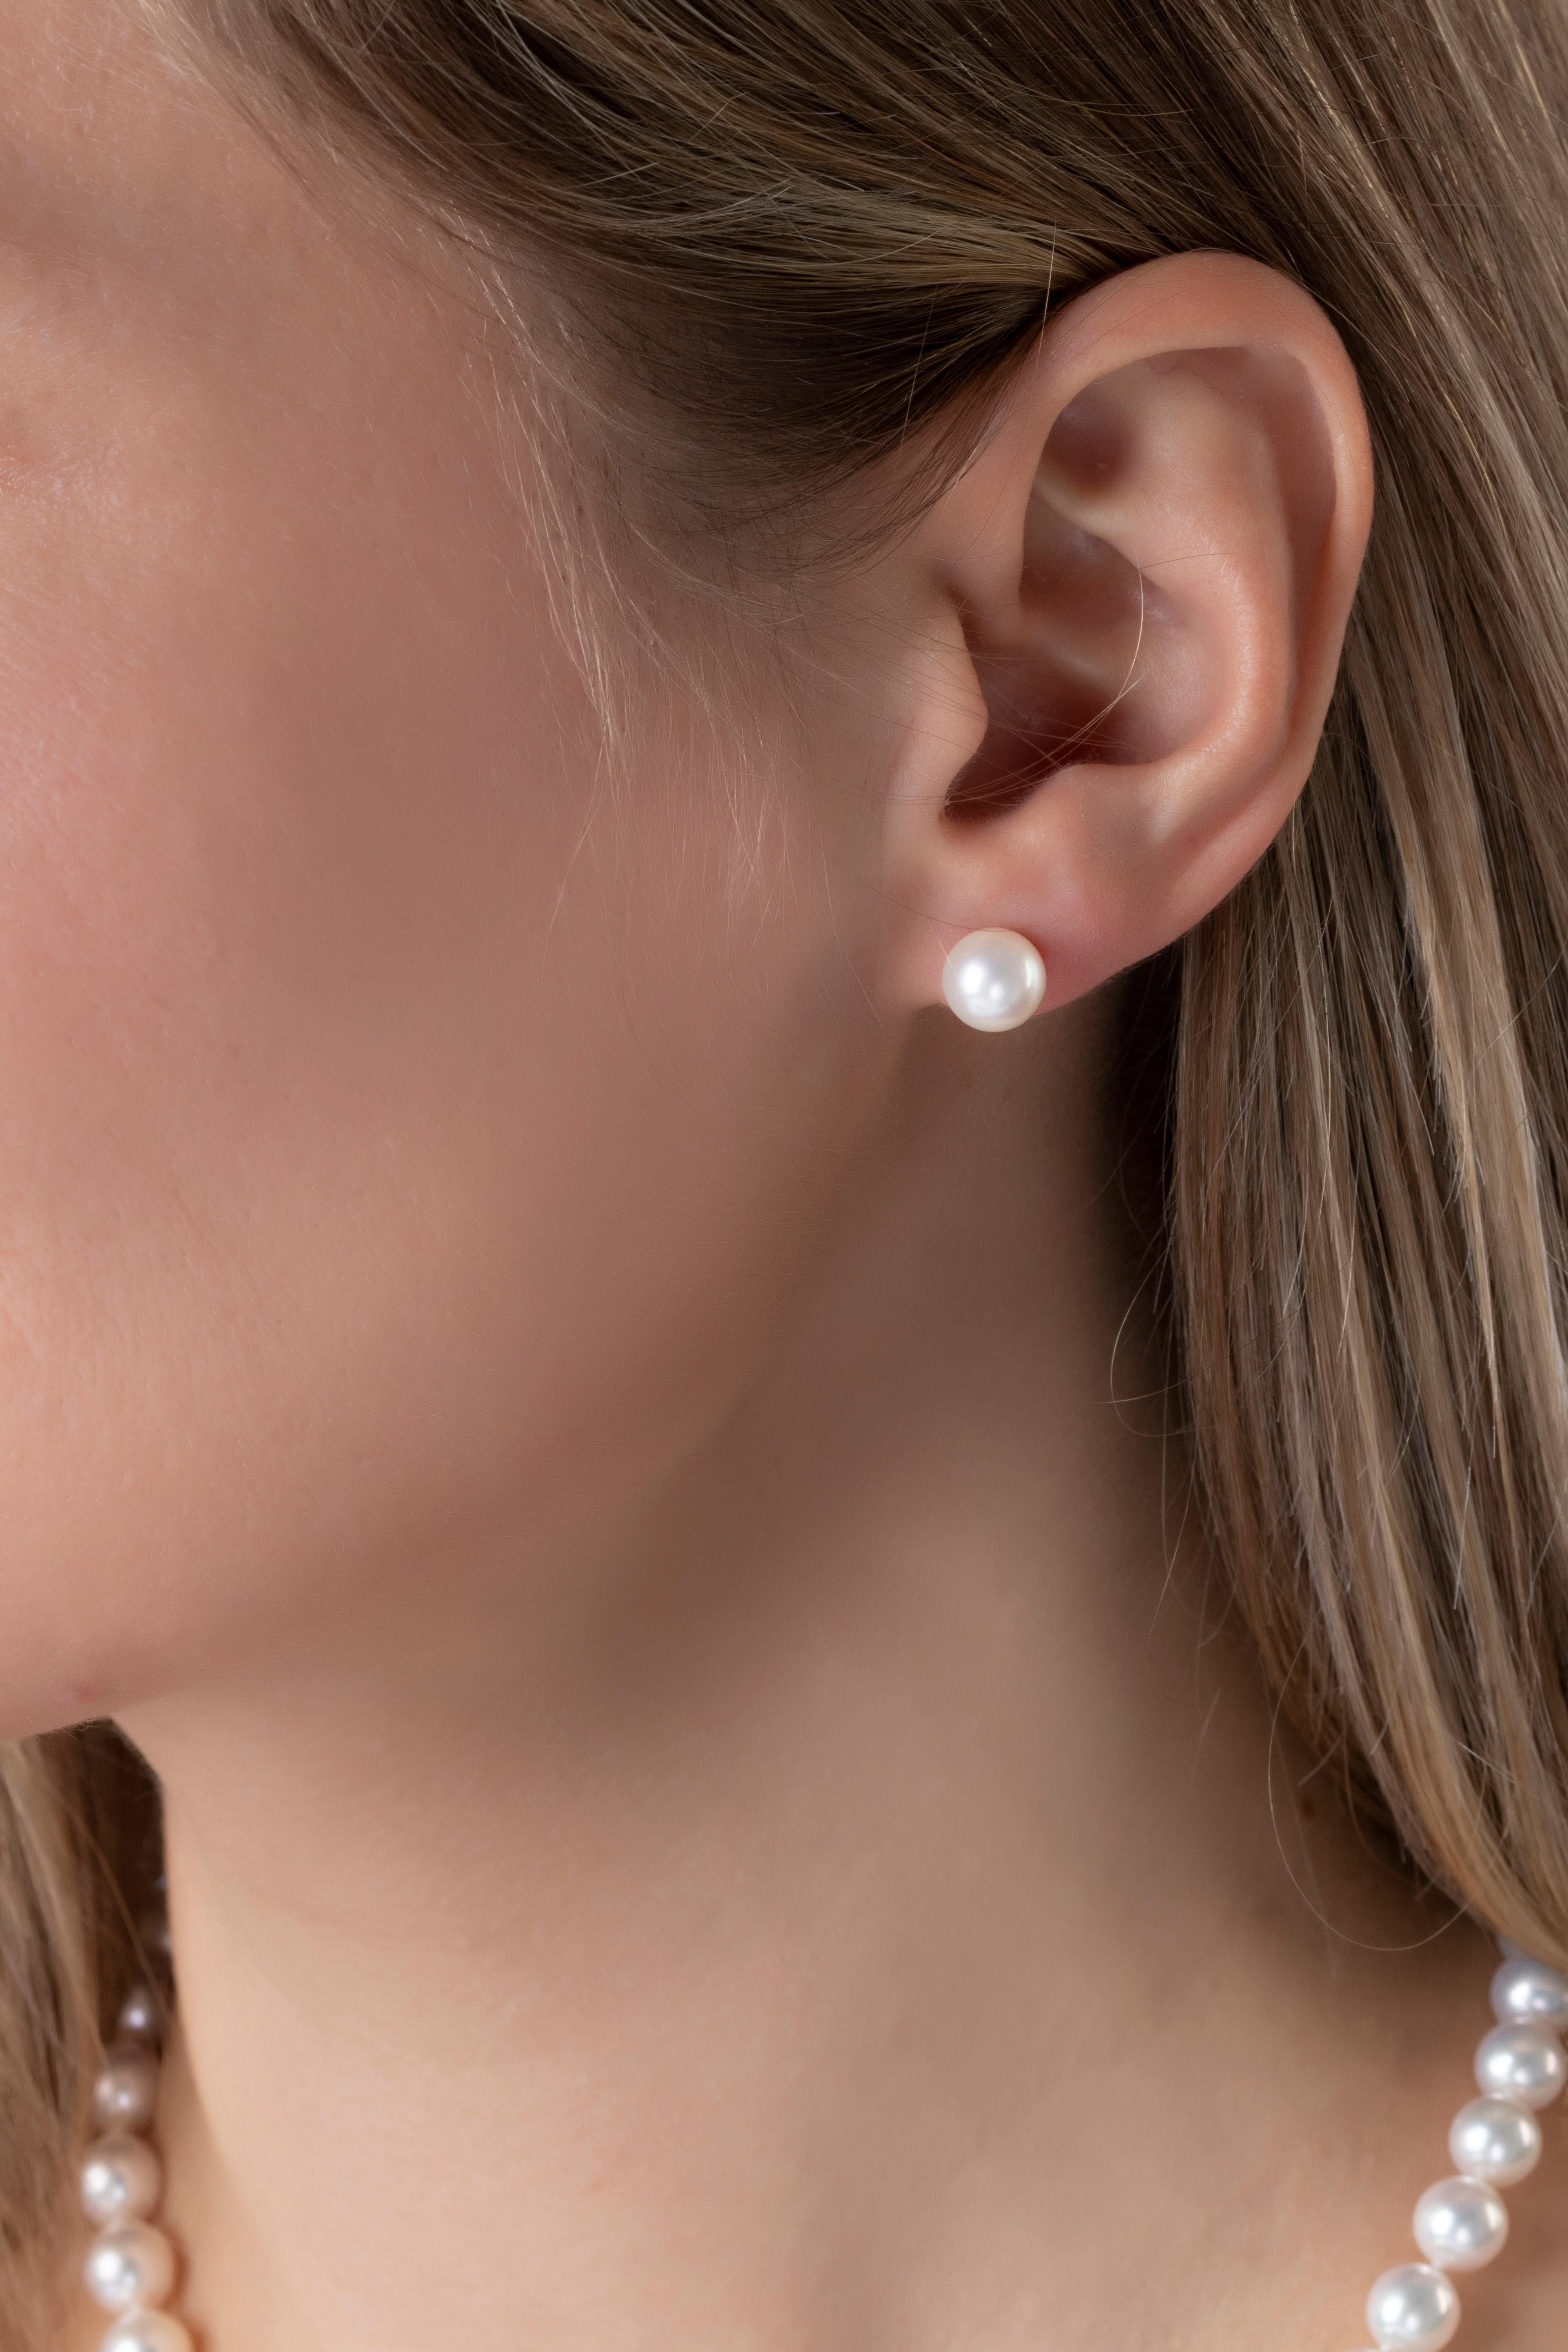 These timeless stud earrings by Yoko London feature high quality 8-8.5mm Japanese Akoya pearls on a traditional 18 Karat Yellow Gold post and scroll fitting. Classic and elegant, these lustrous pearl earrings are an essential for every jewellery